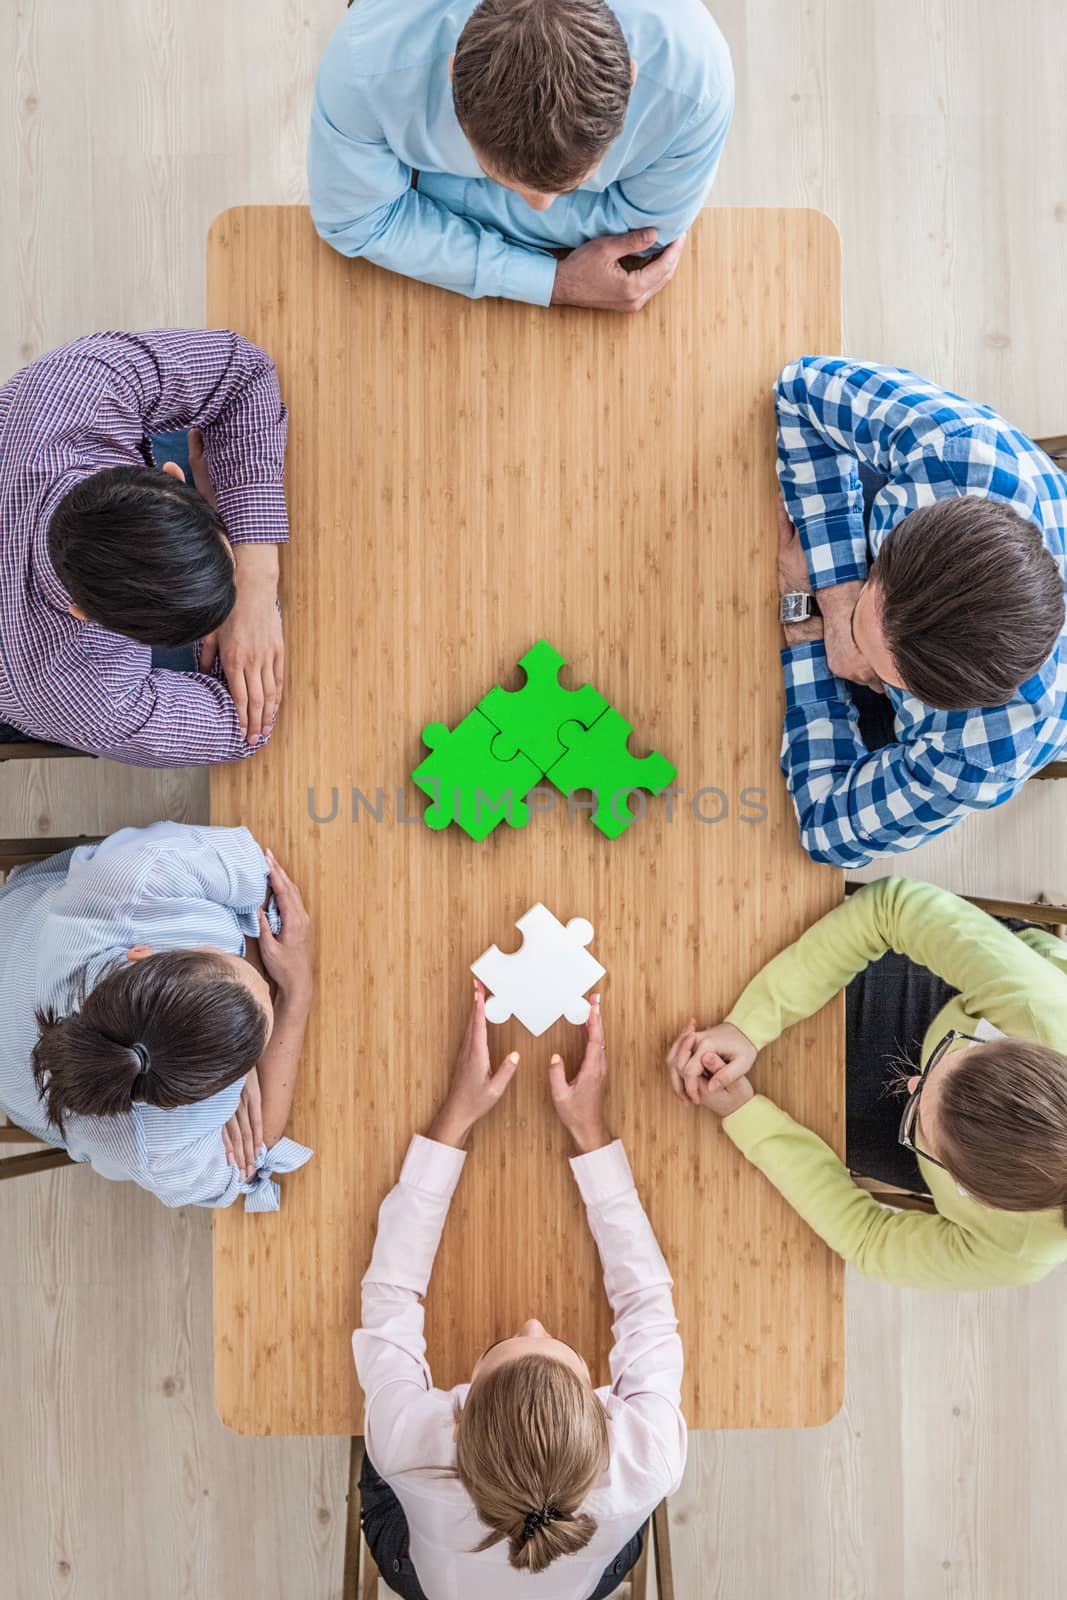 People assembling puzzle, corporate teamwork concept